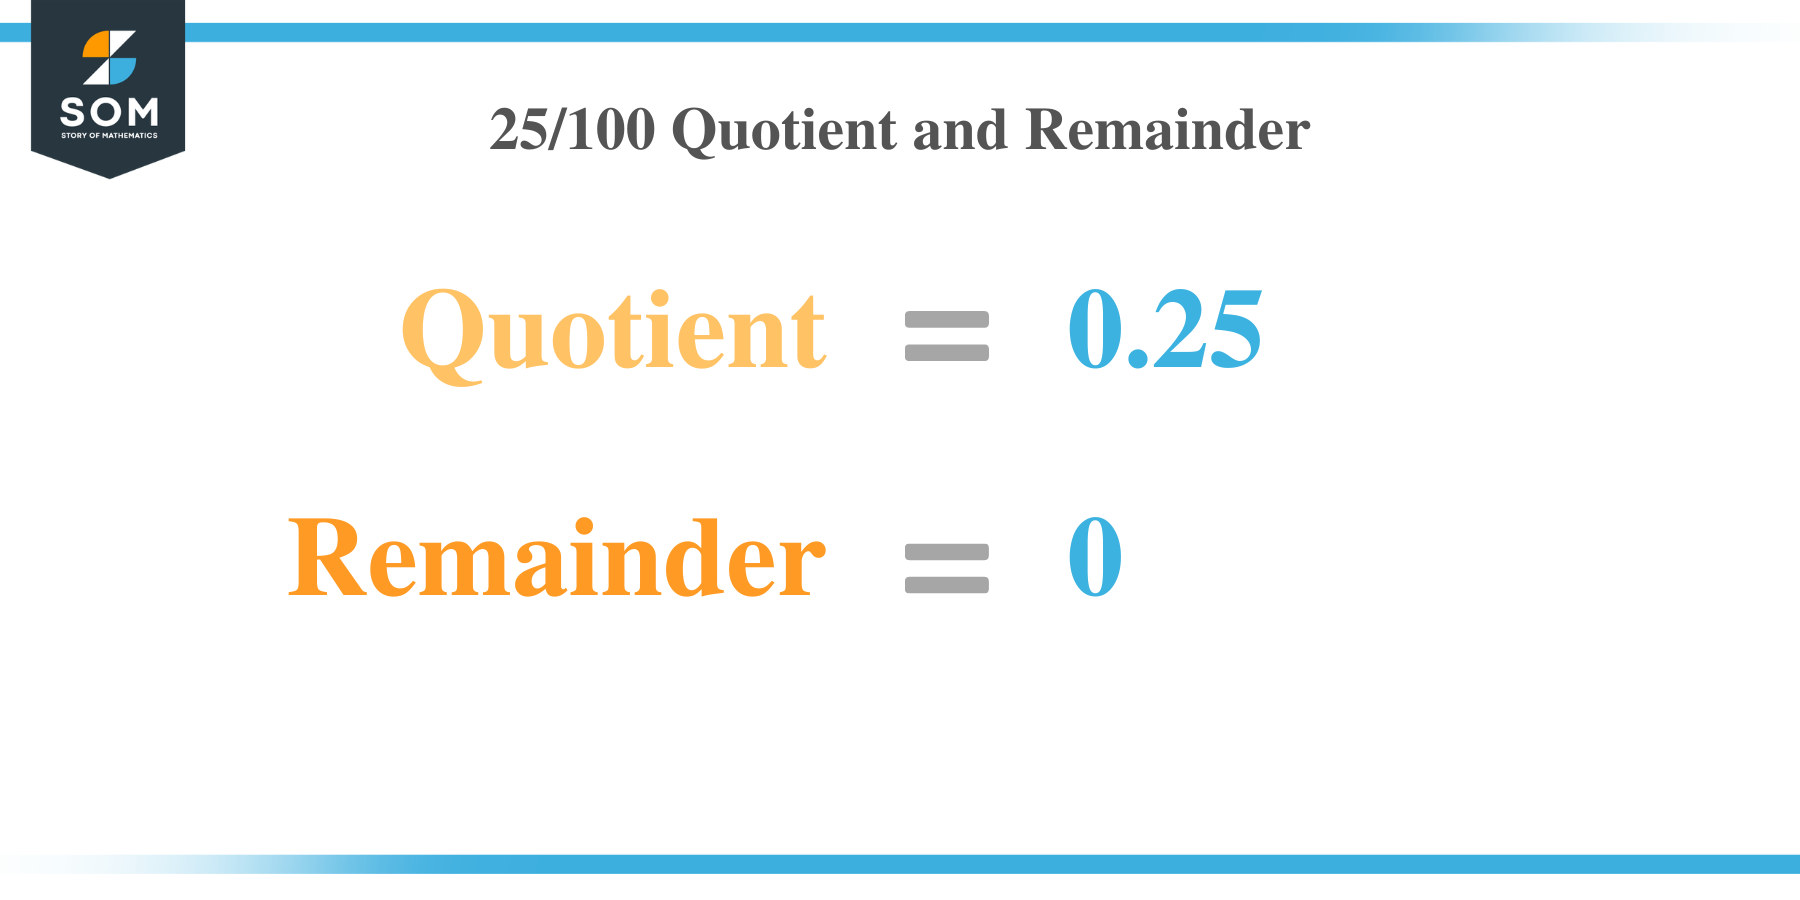 25 by 100 Quotient and Remainder